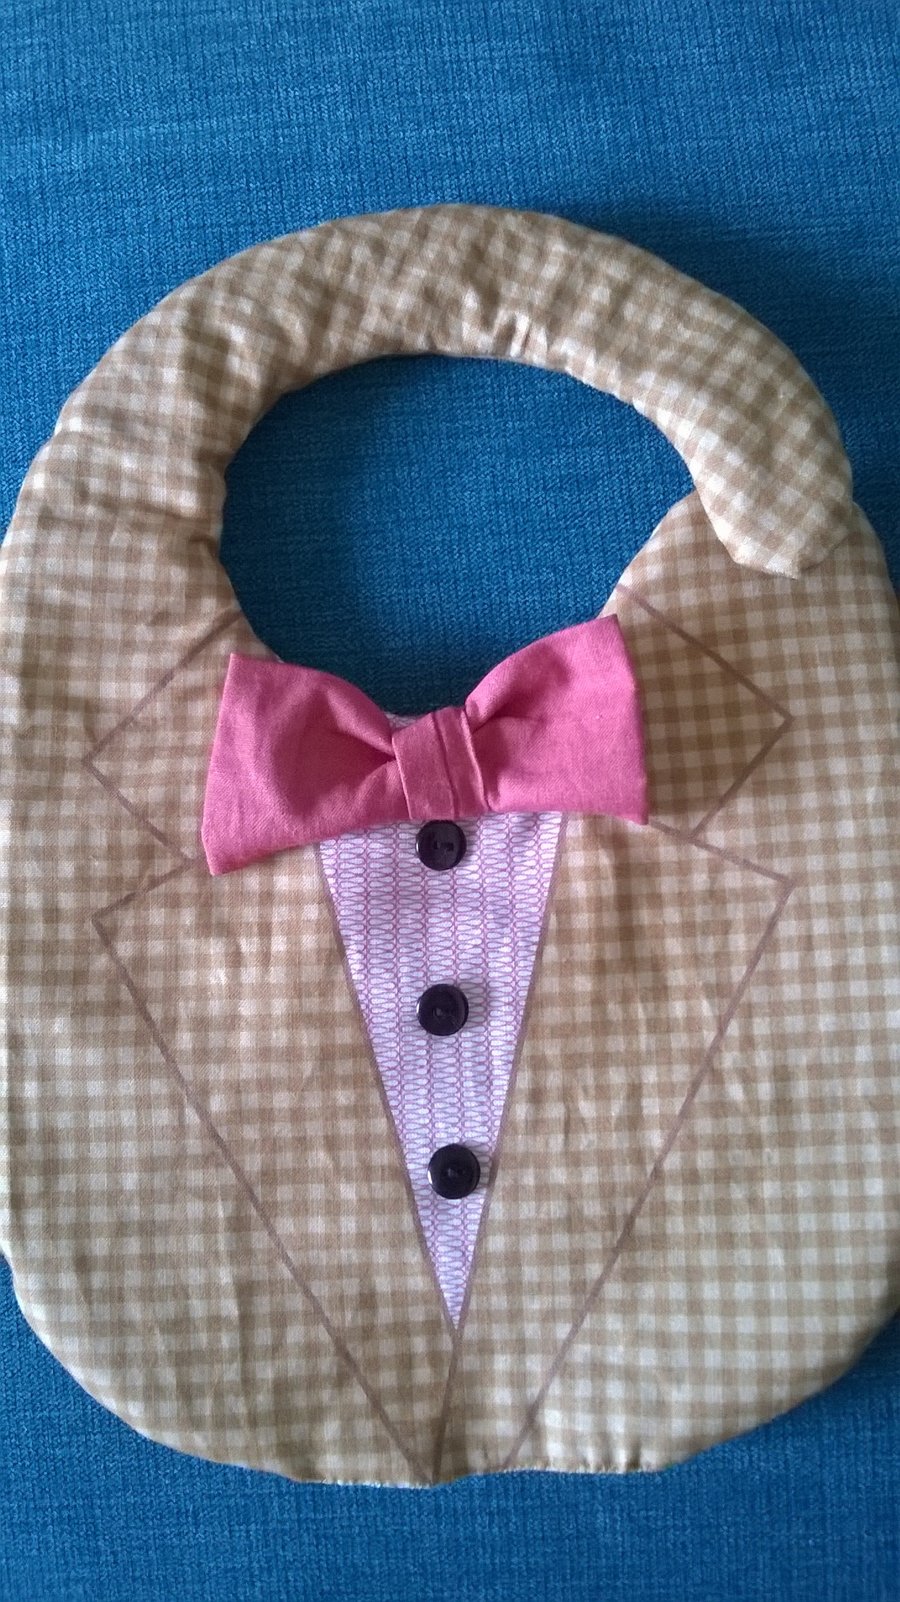 Doctor Who Baby Bib With Bow Tie